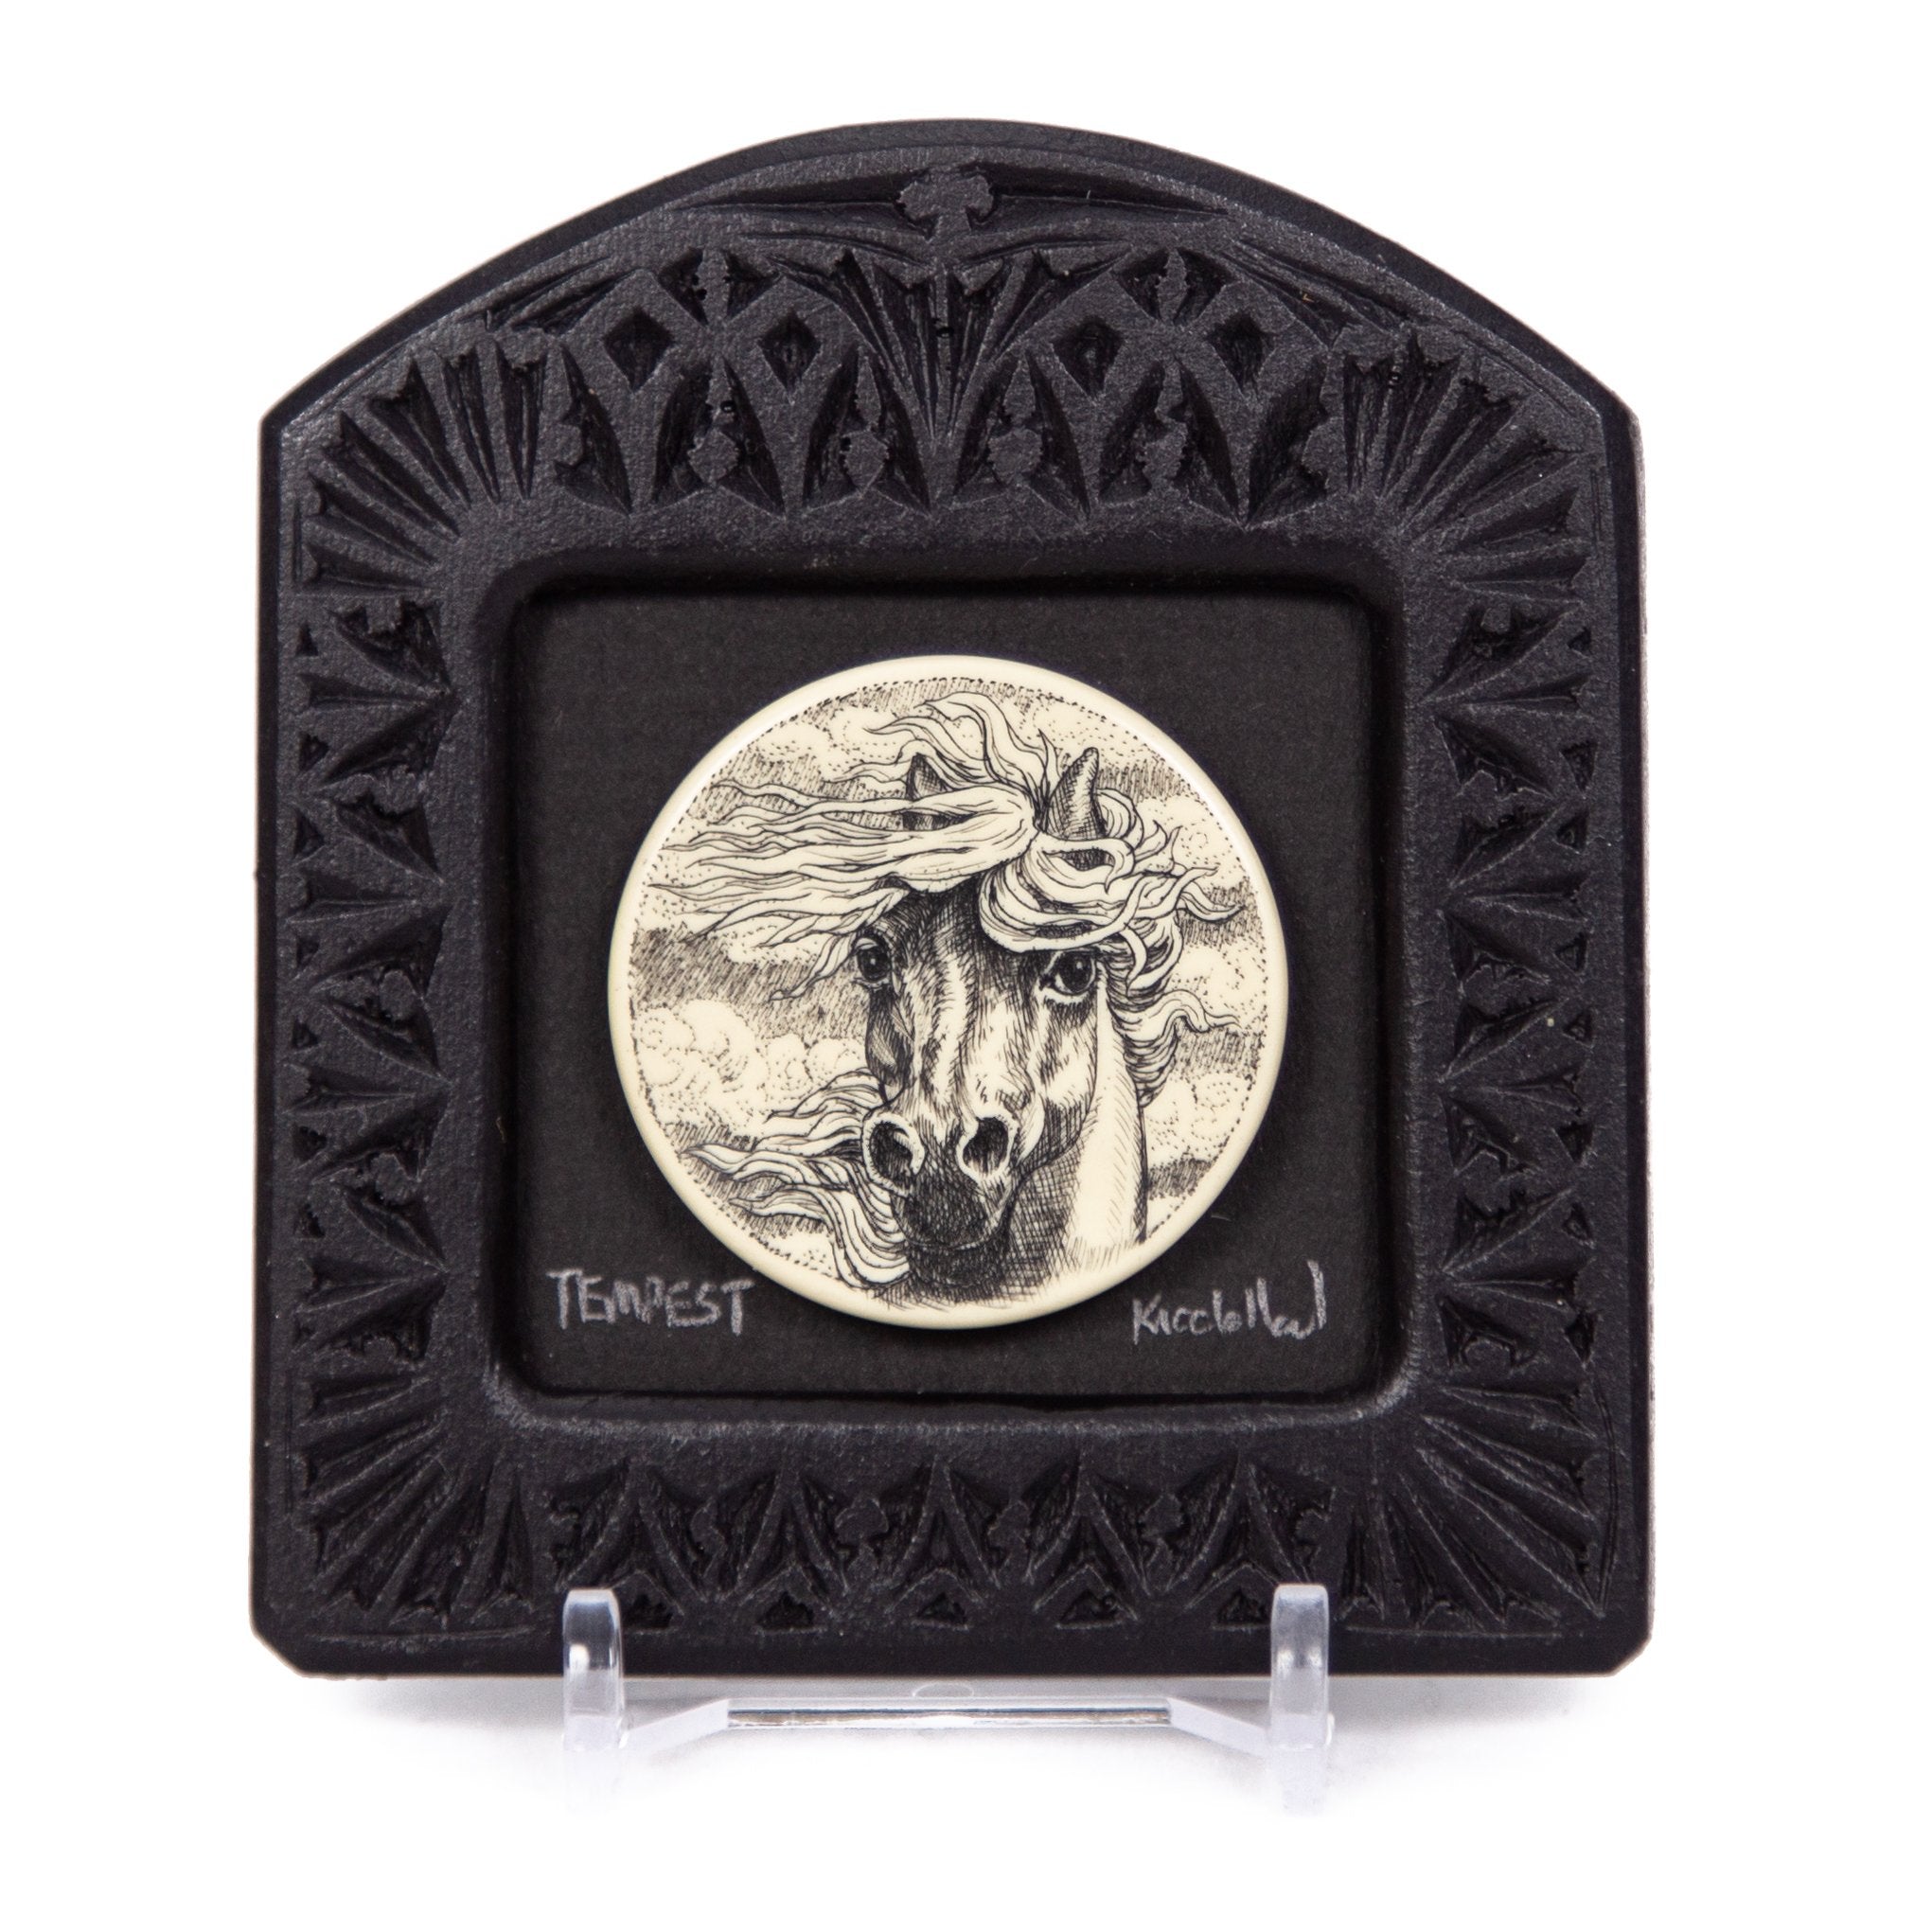 "Tempest" Small Chip Carved Frame